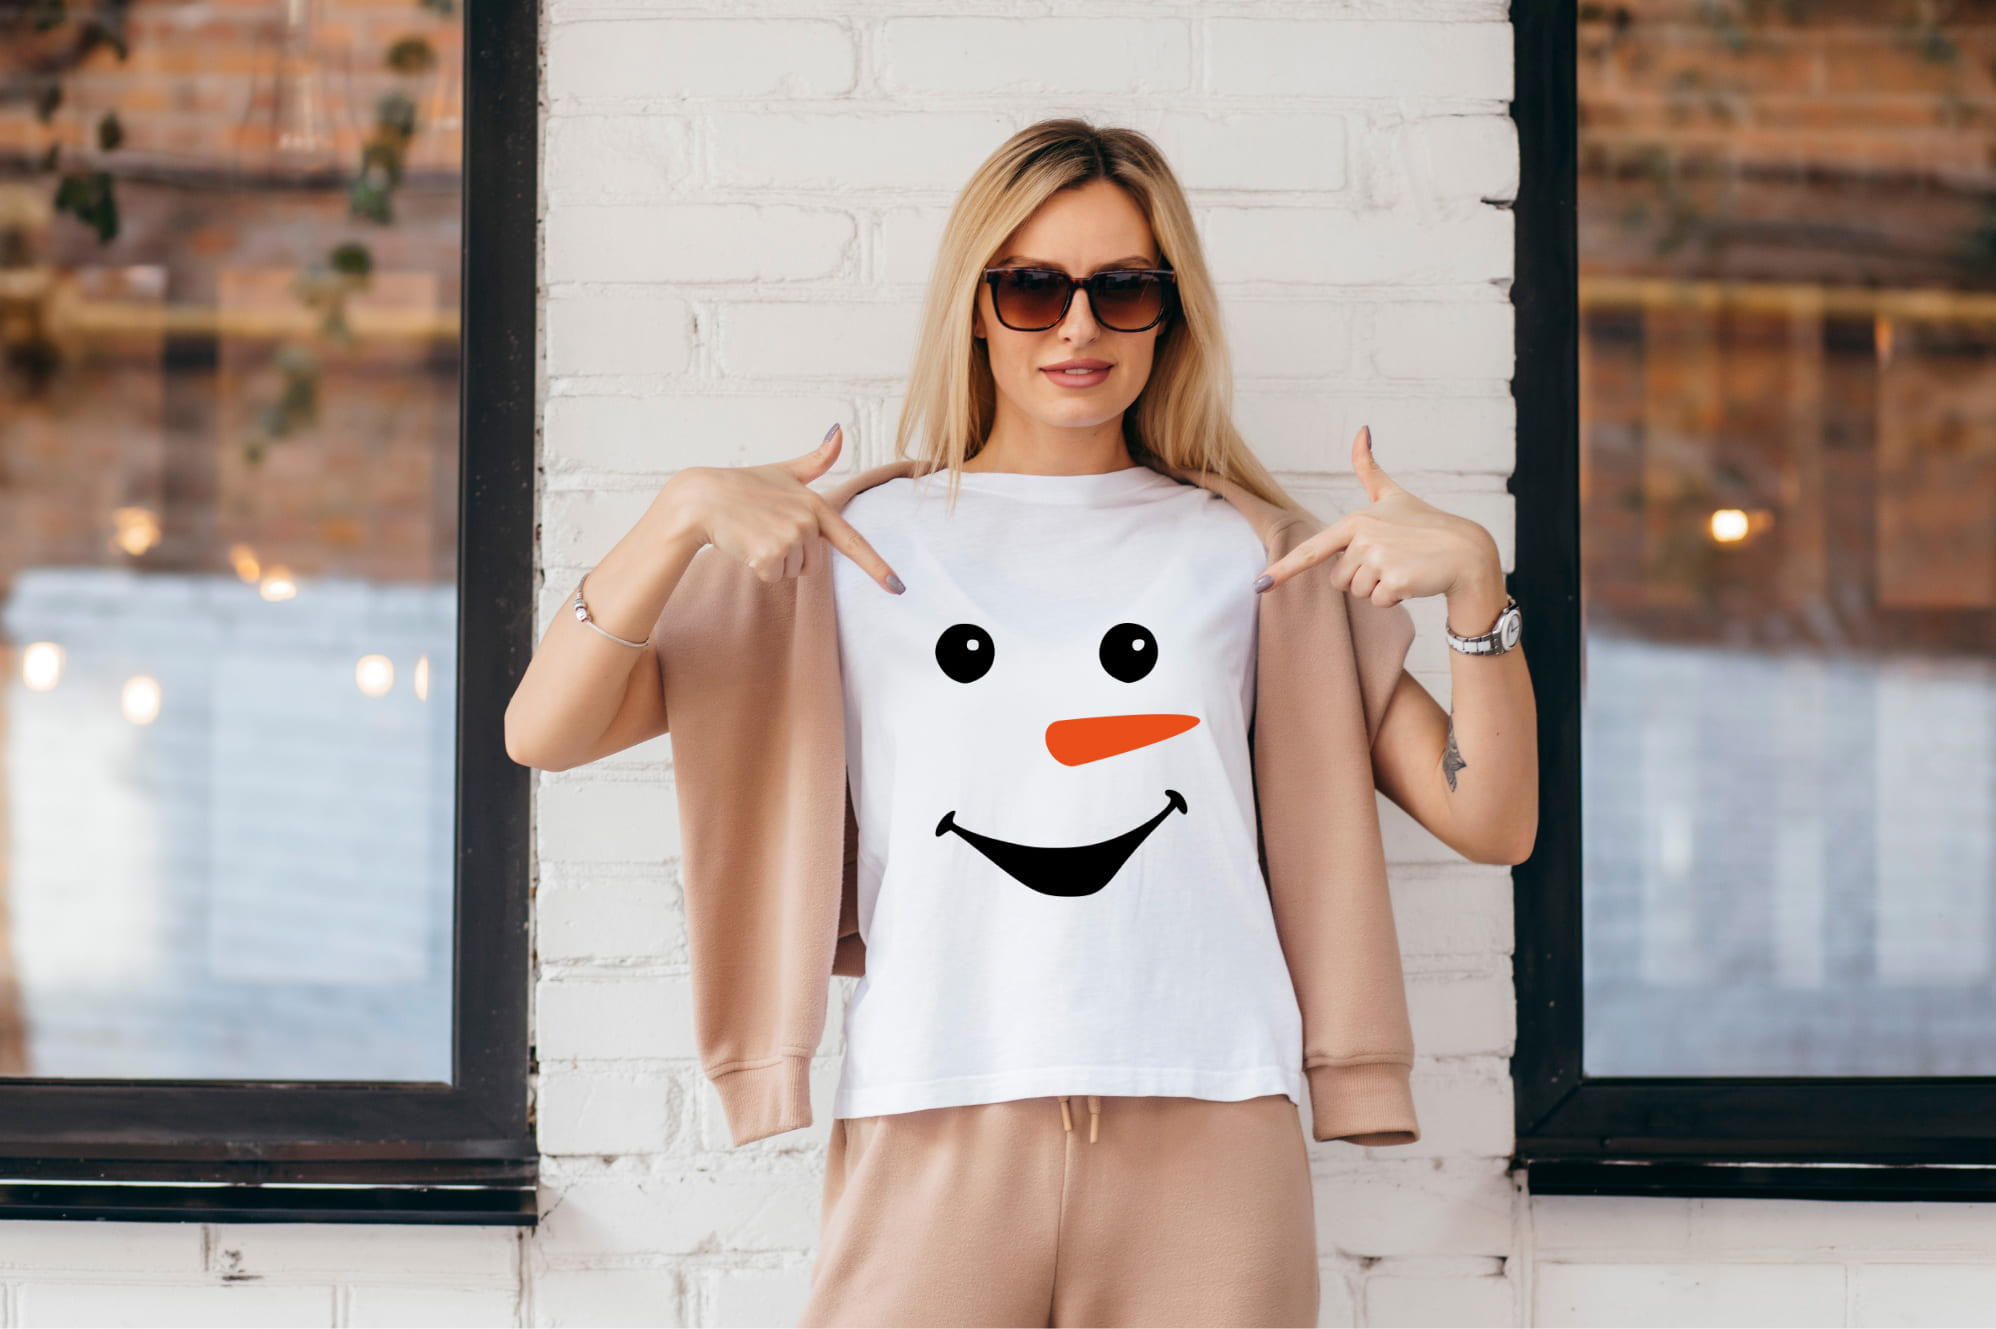 Simple snowman face on a white t-shirt.